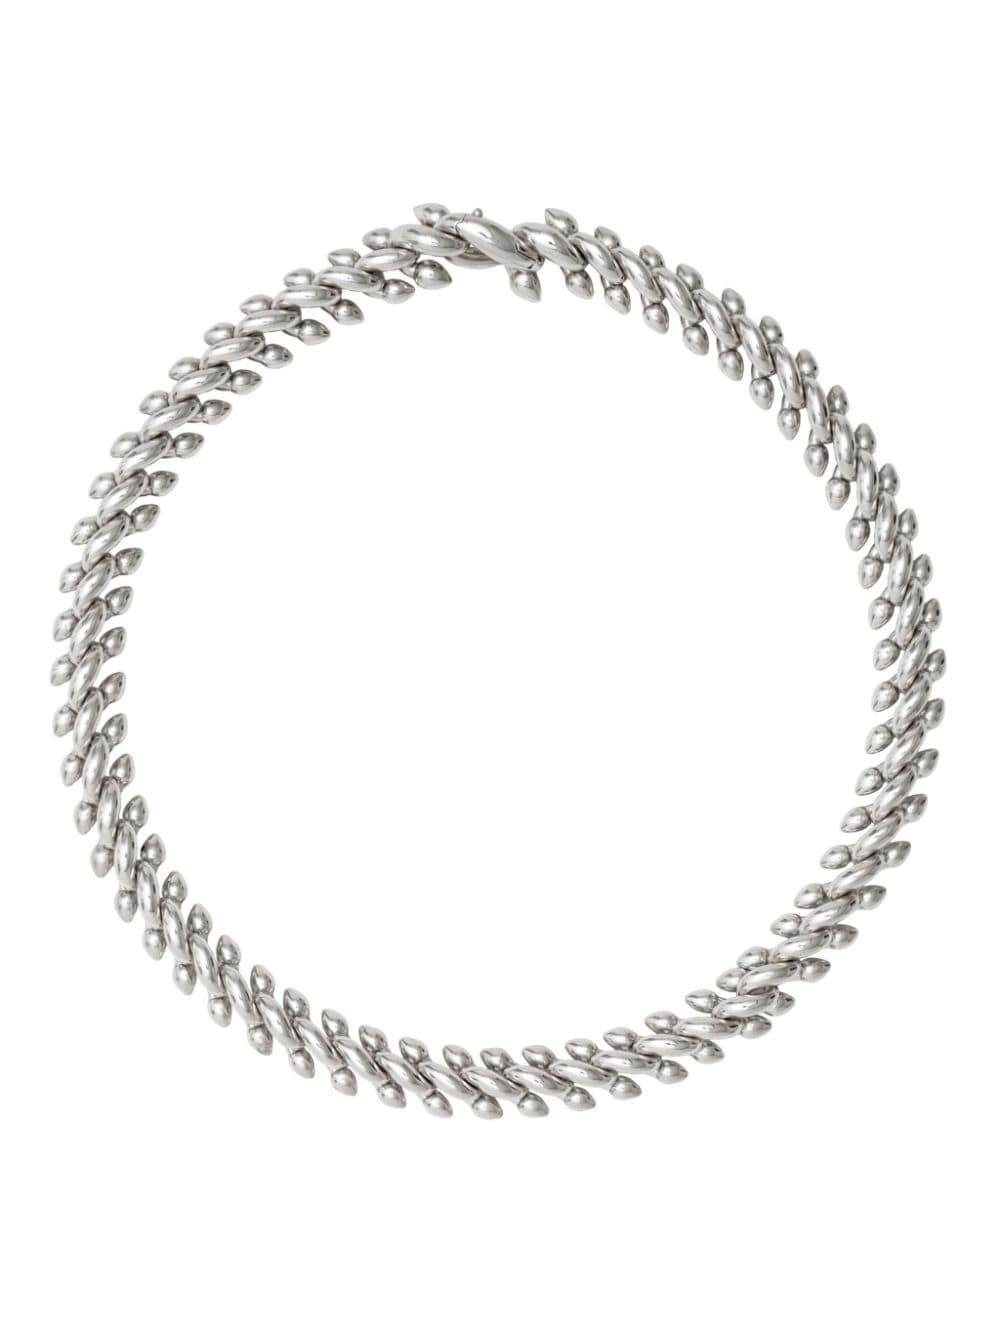 Spear chain necklace - 1